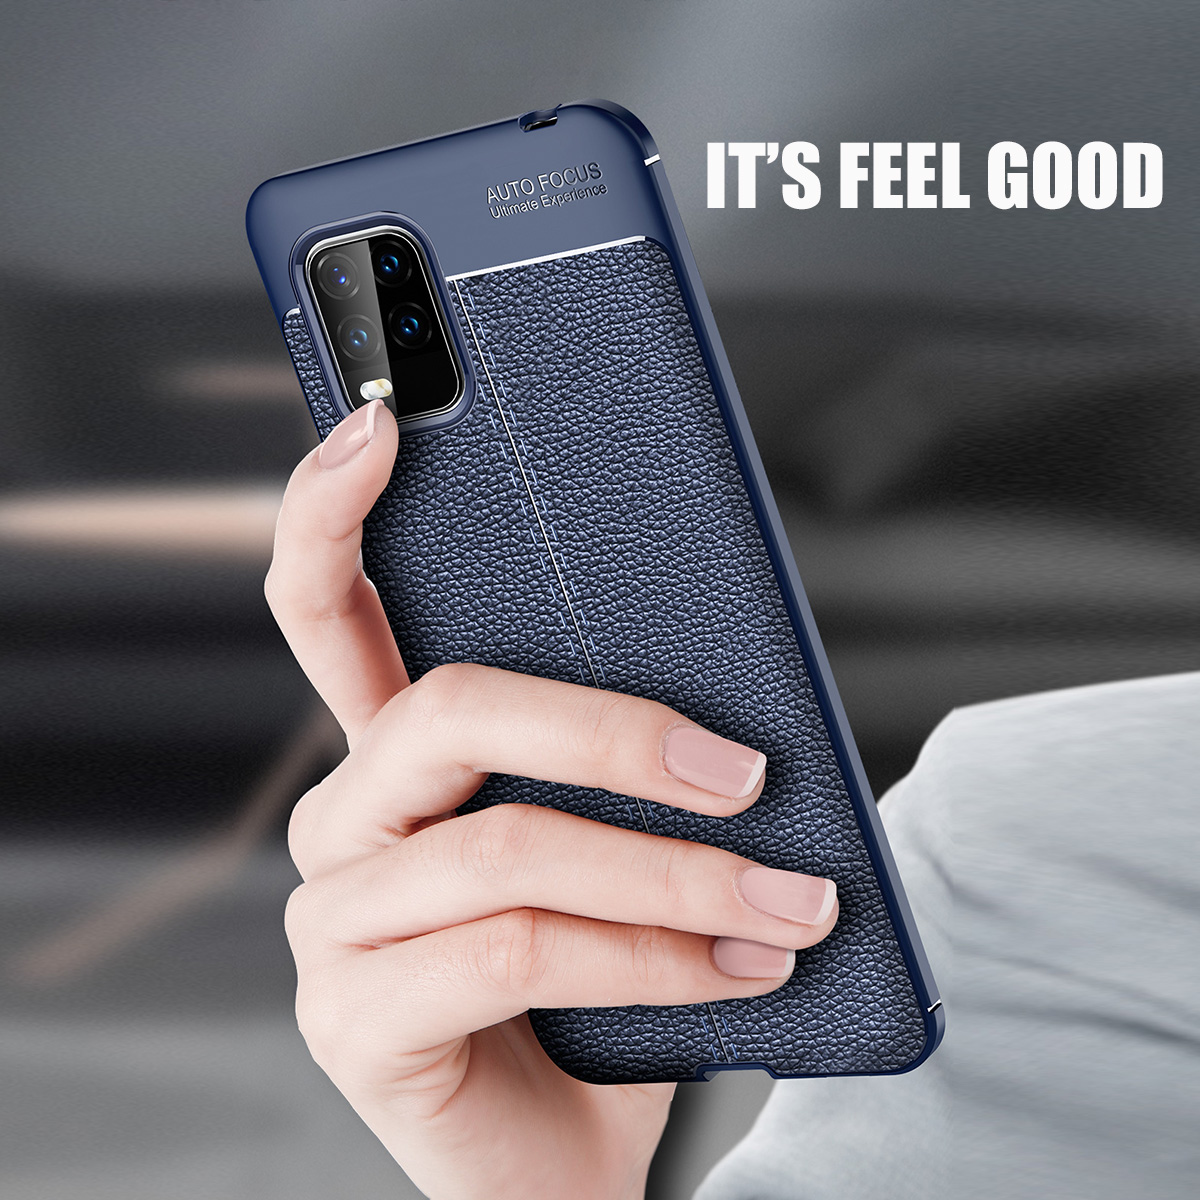 Bakeey-for-Xiaomi-Mi-10-Lite-Case-Litchi-Pattern-Shockproof-PU-Leather-TPU-Soft-Protective-Case-Back-1708407-6